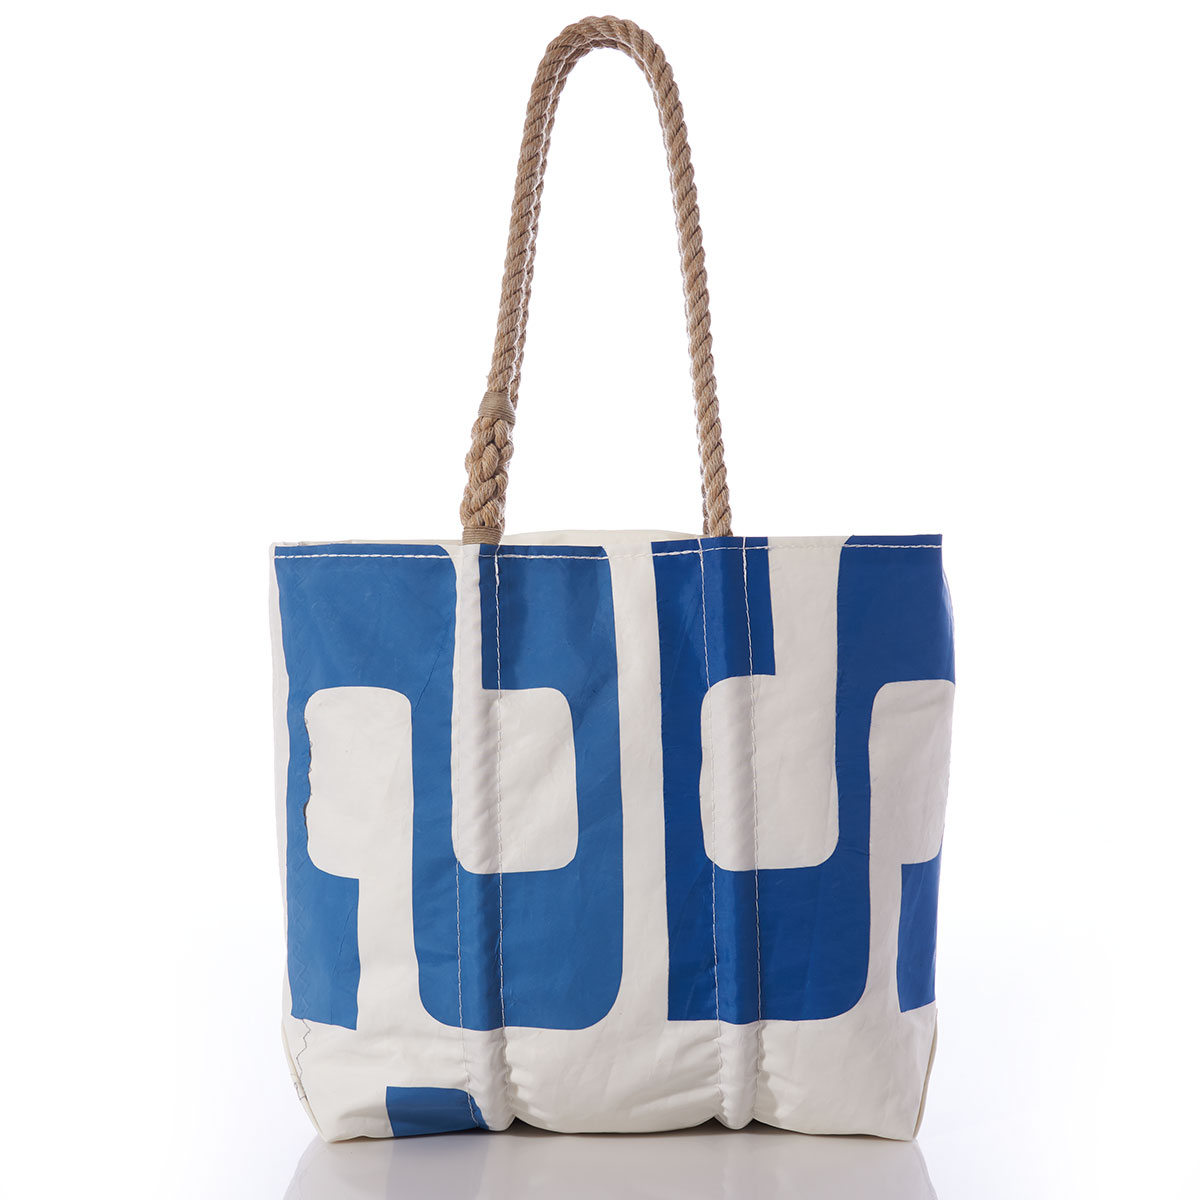 Deluxe Vintage S 22.9 Tote